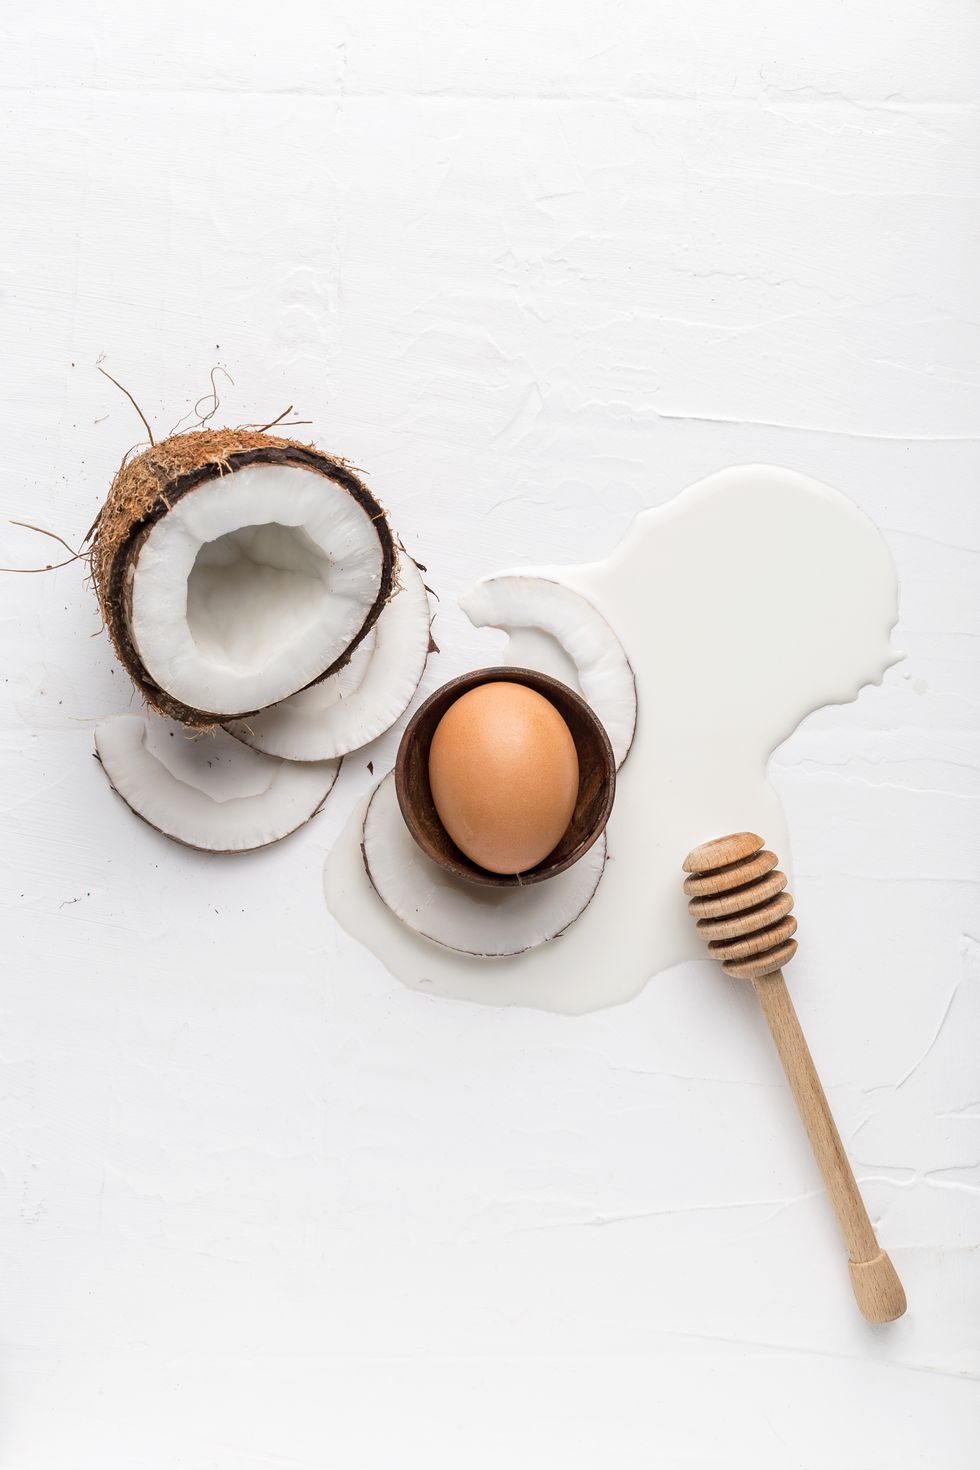 Coconut, egg and fresh milk on a white background, top view